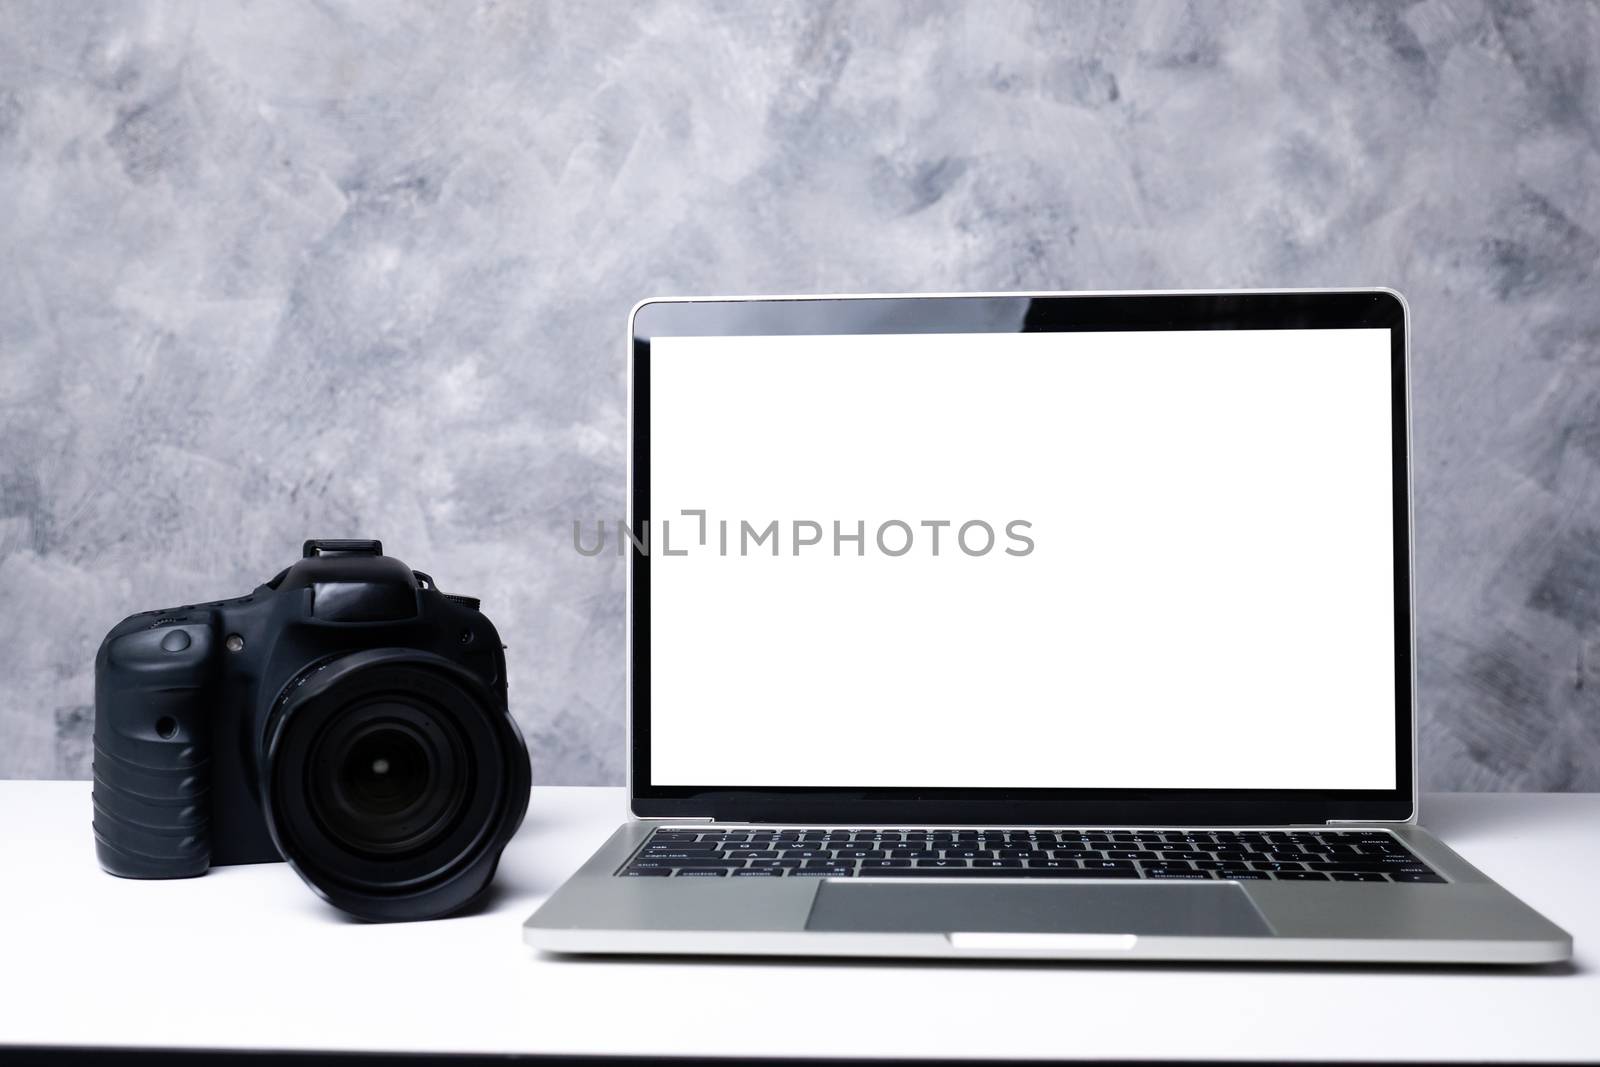 A black digital camera and a computer laptop on a table  by ronnarong